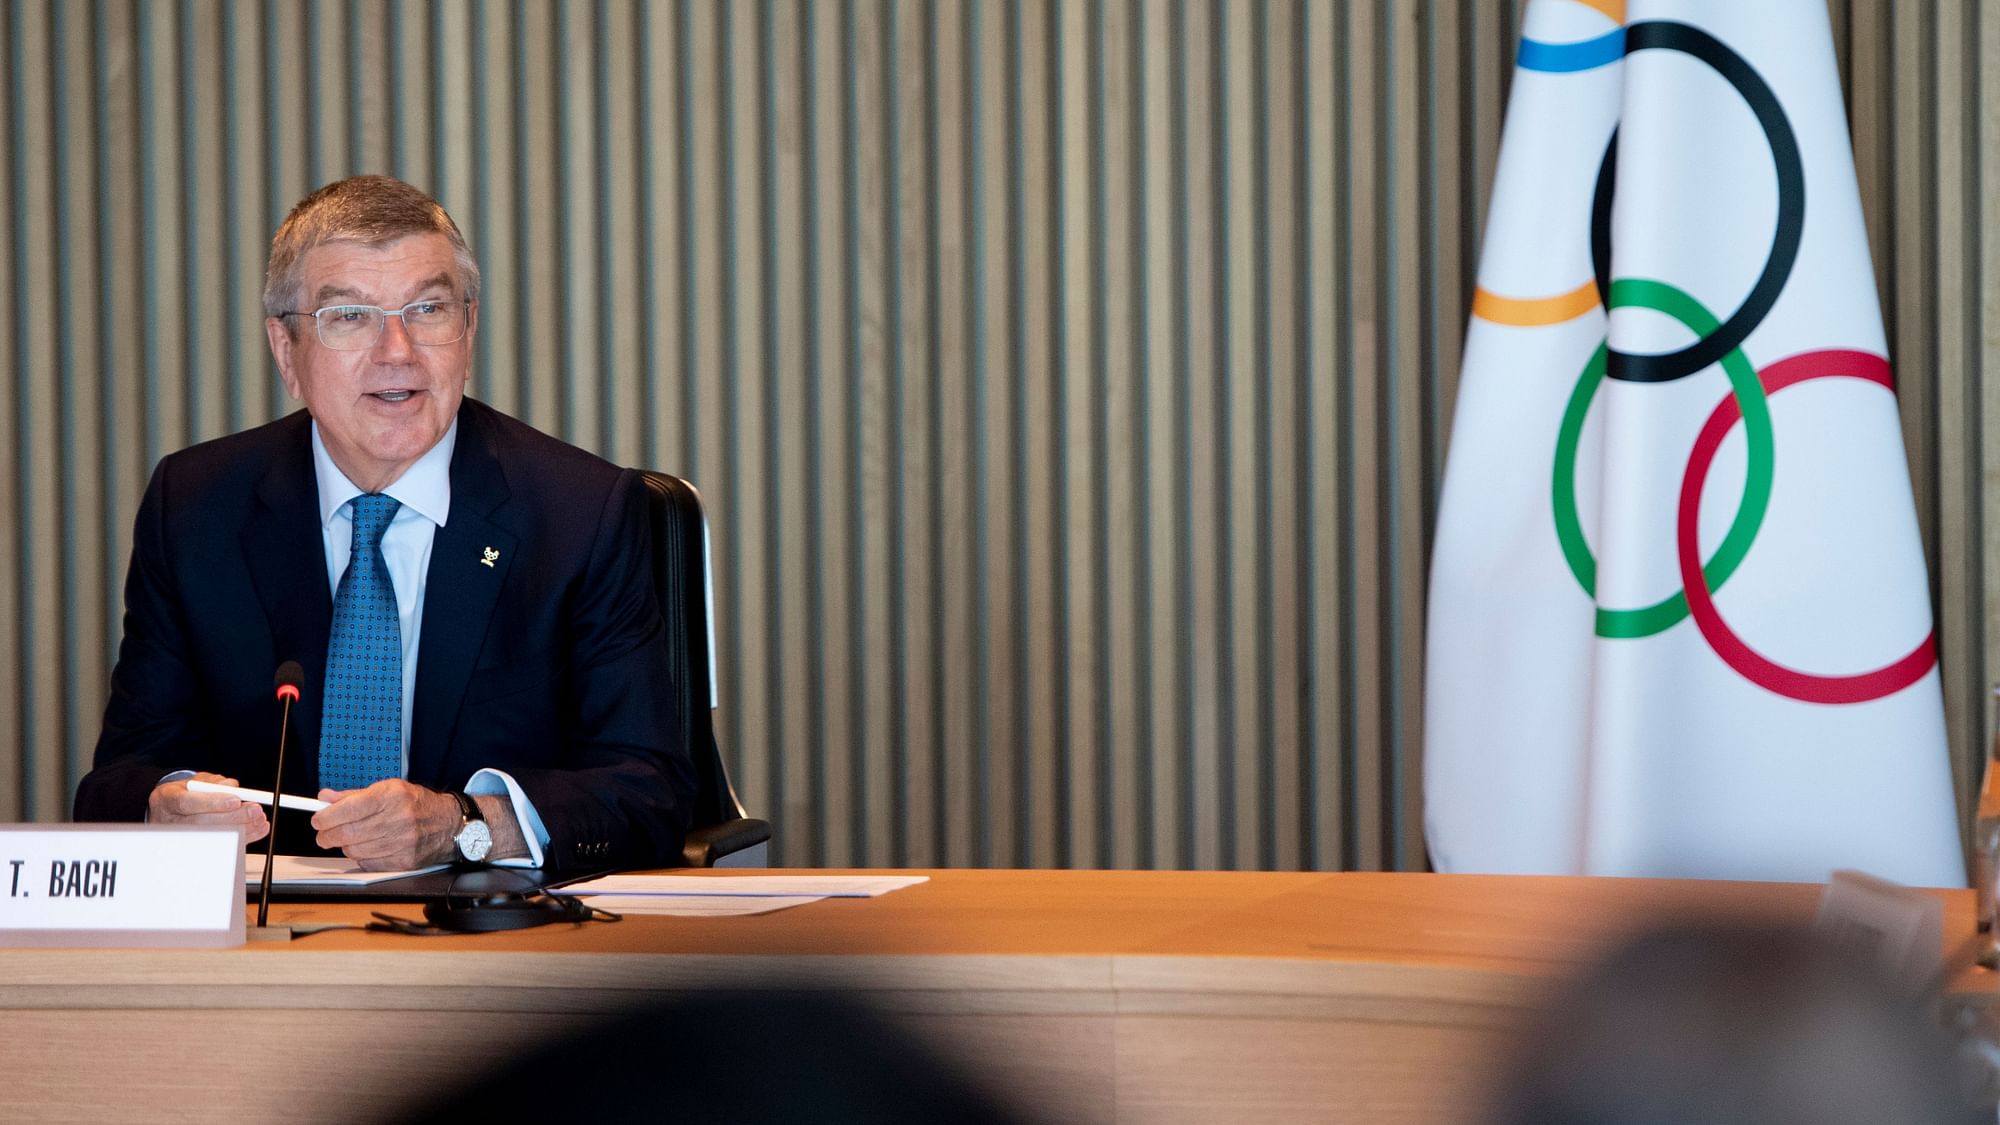 President Thomas Bach  speaks at the International Olympic Committee (IOC) executive board meeting at the Olympic House in Lausanne, Switzerland.